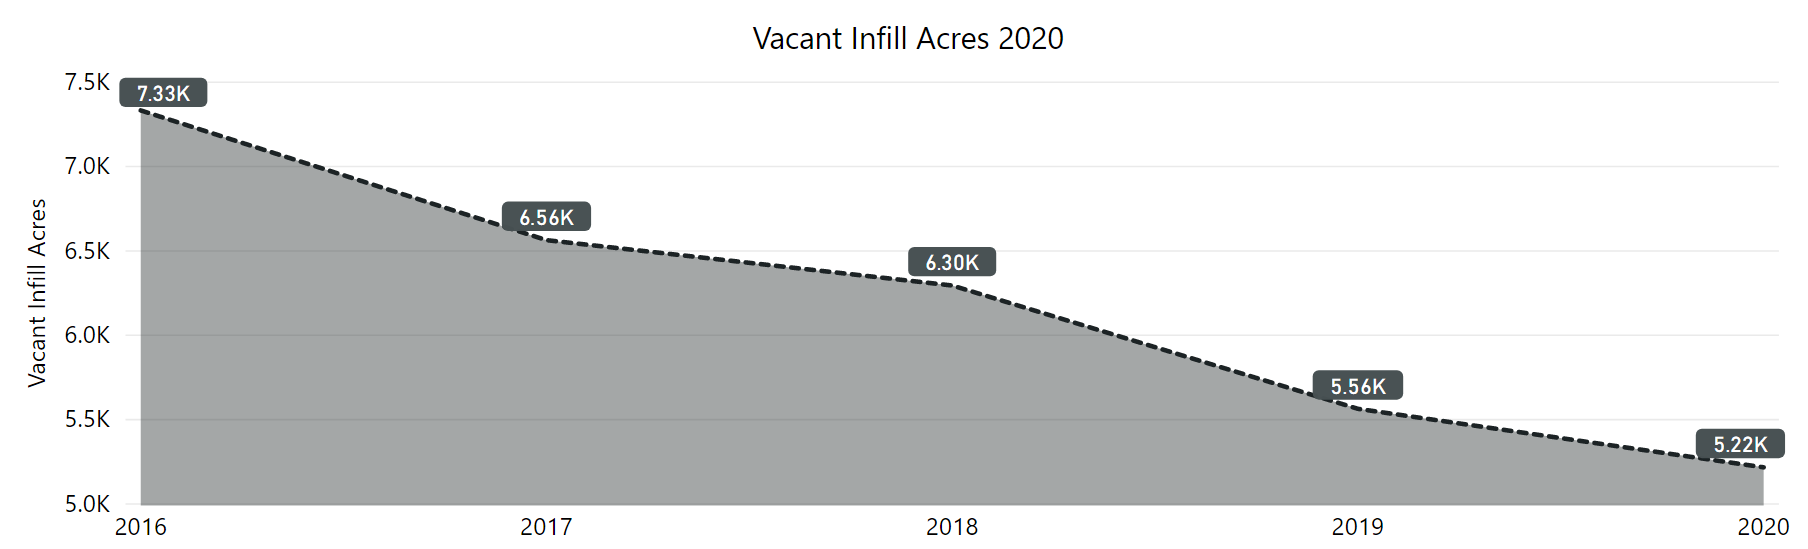 vacant infill acres by year 2016 to 2020. decreased each year from 7.33k in 2016 to 5.22k in 2020.